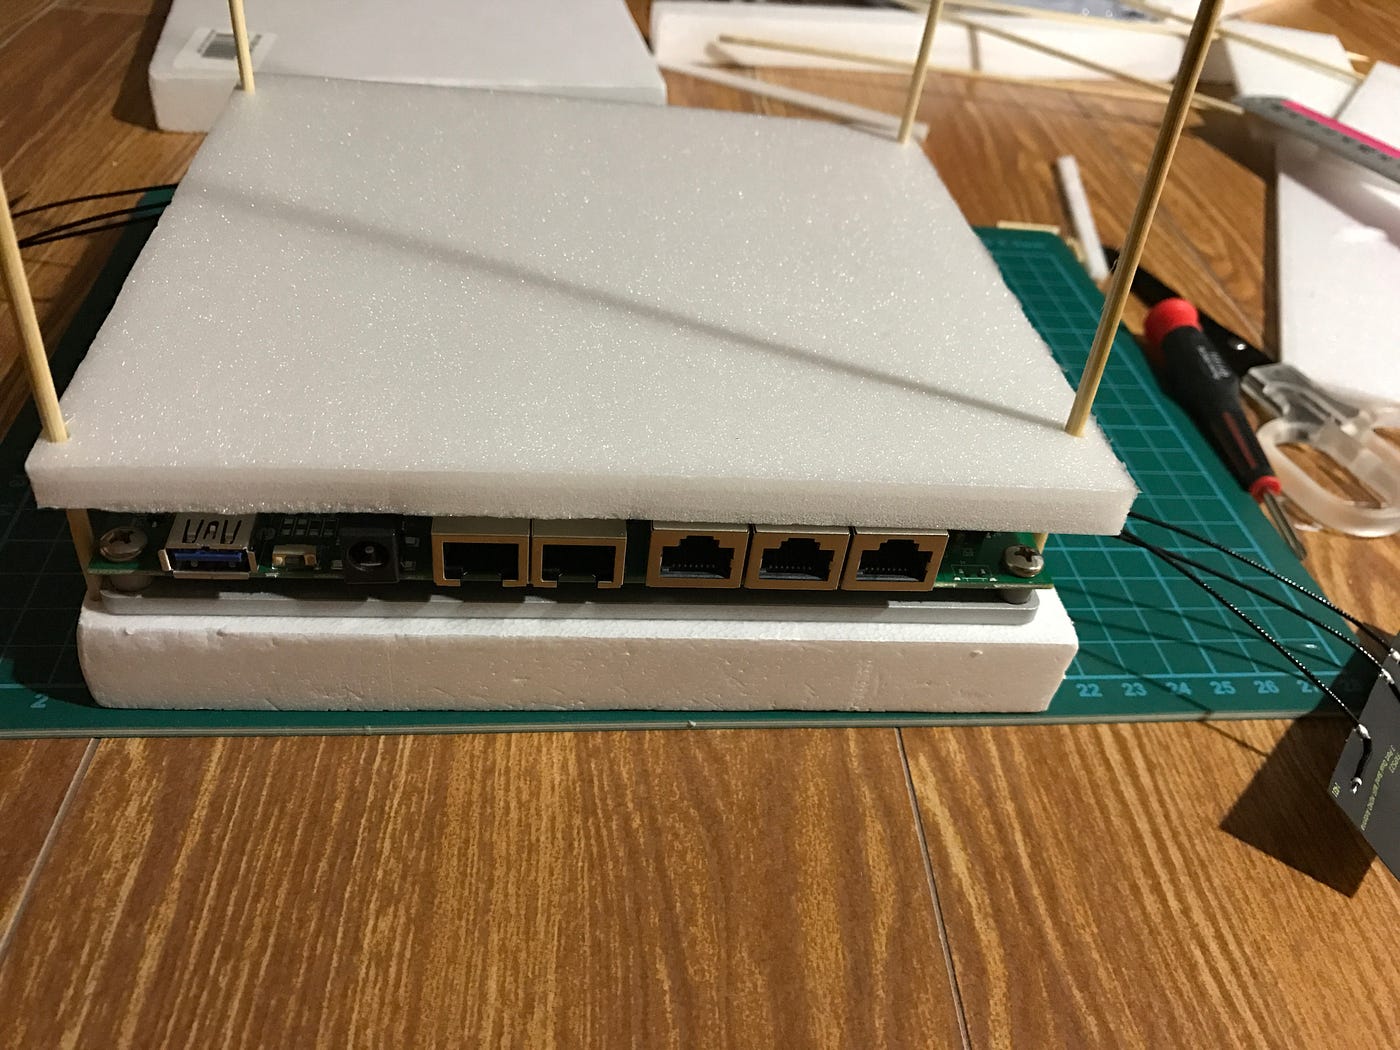 Building my own router and HomeKit hub | by น | llun | Medium